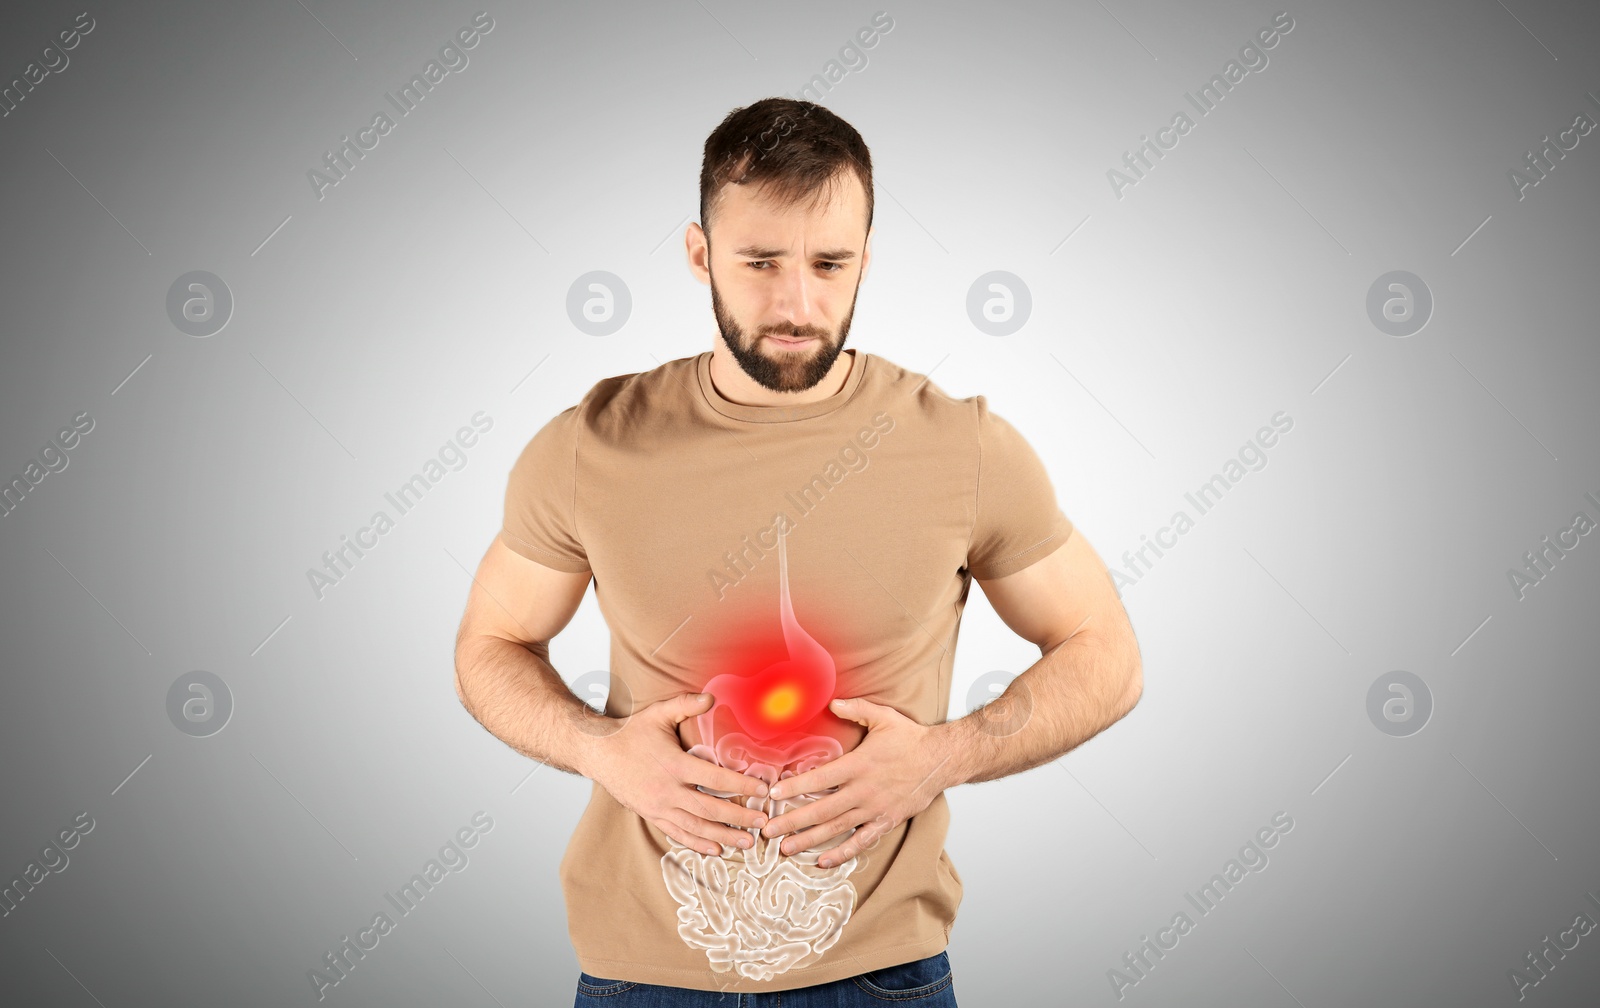 Image of Healthcare service and treatment. Man suffering from abdominal pain on grey background. Illustration of gastrointestinal tract